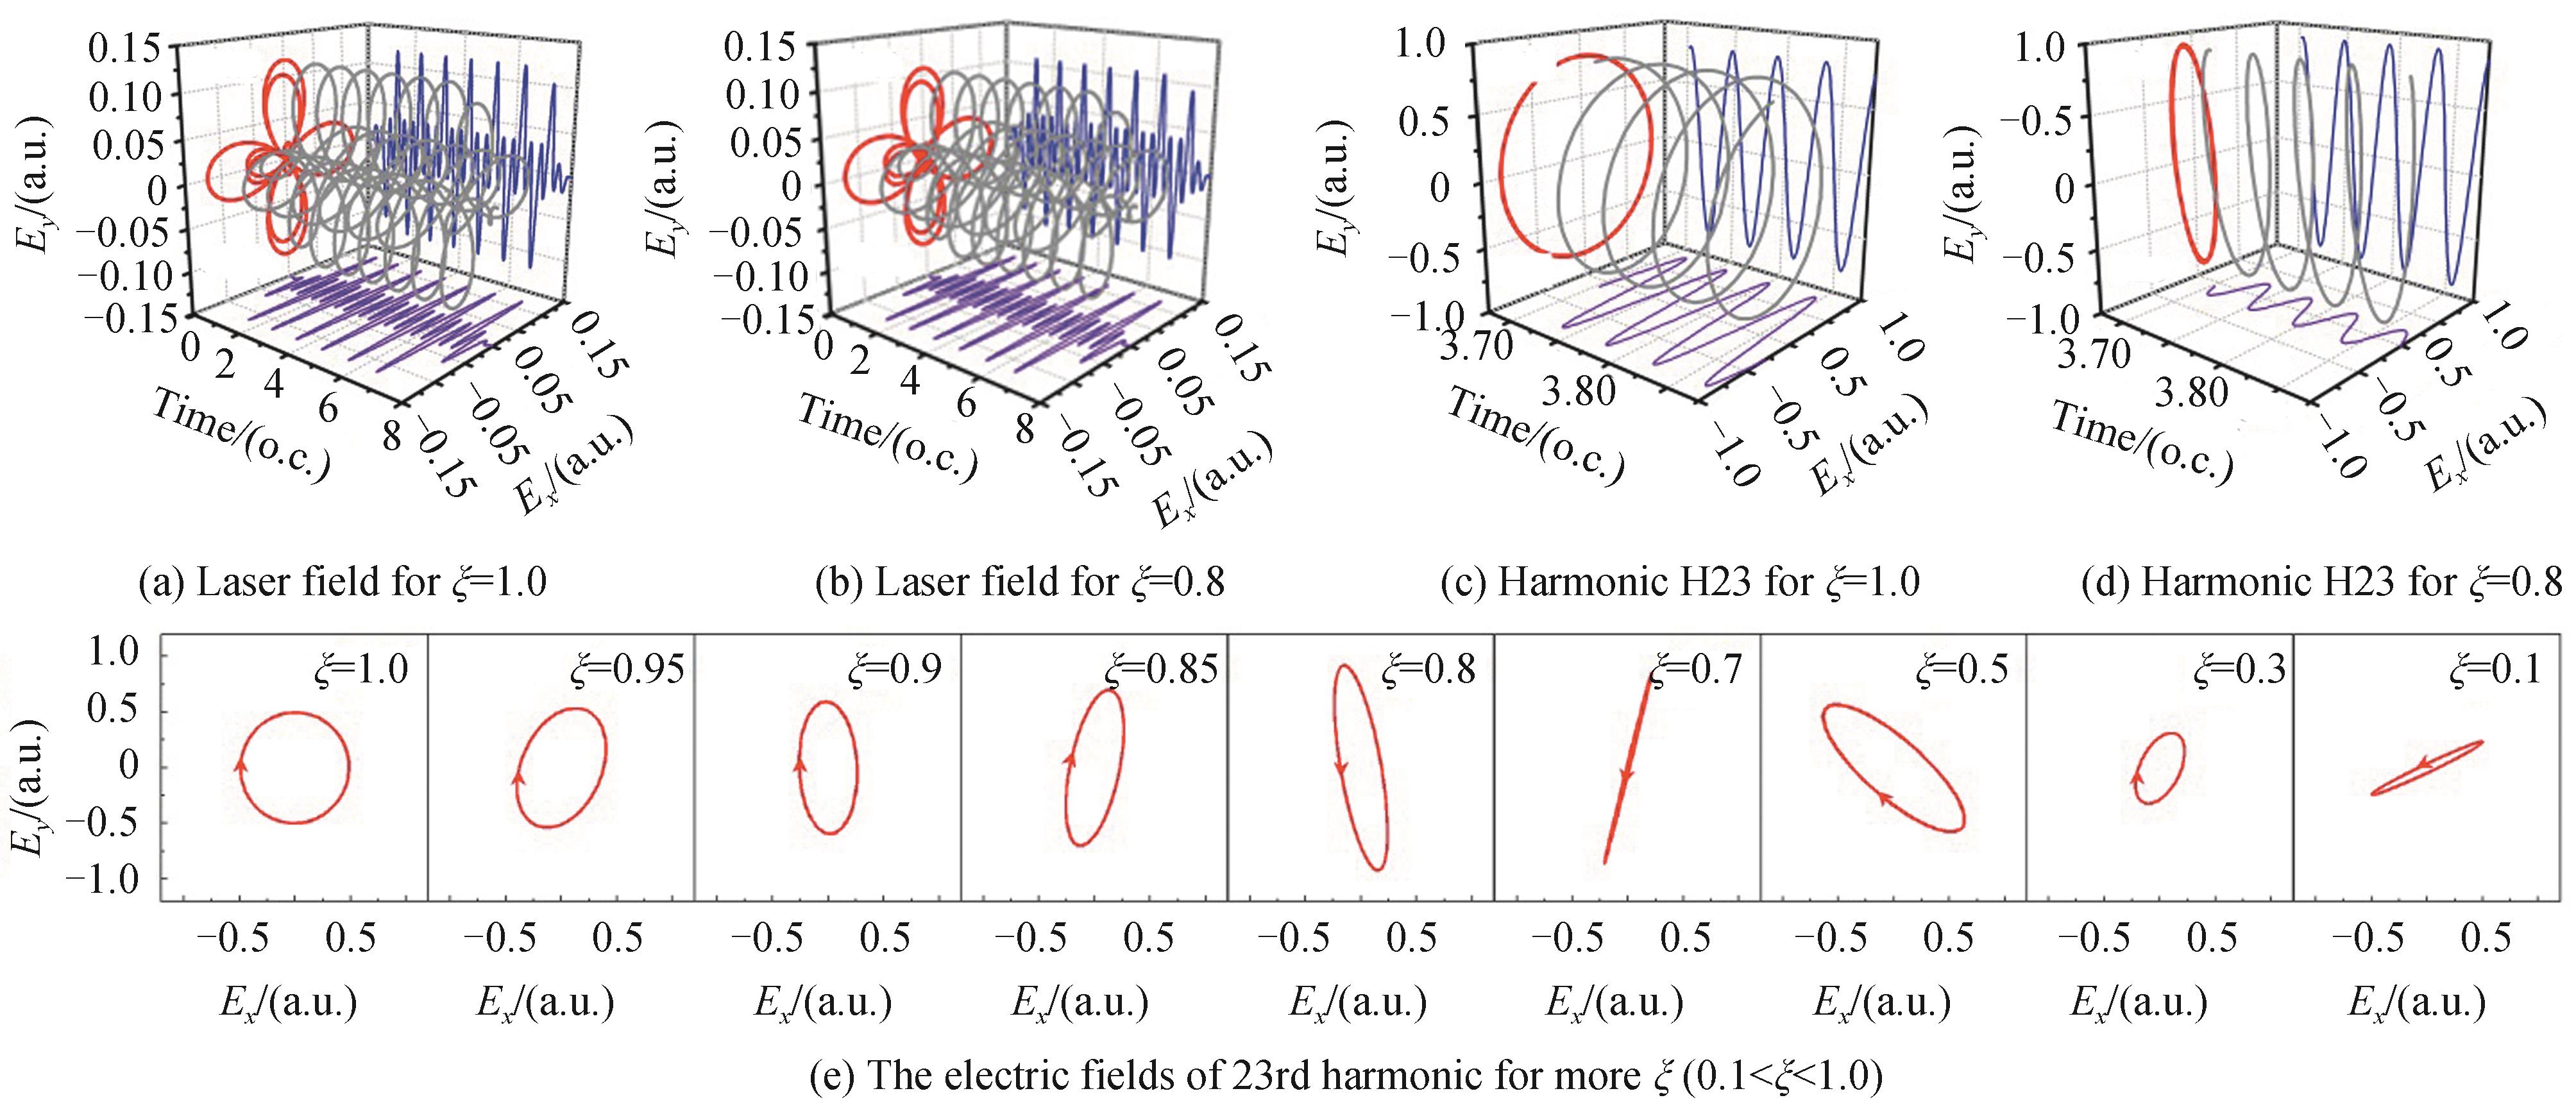 The waveforms of electric fields for driving laser field and 23rd harmonic （o.c. is the optical cycle of fundamental pulse）